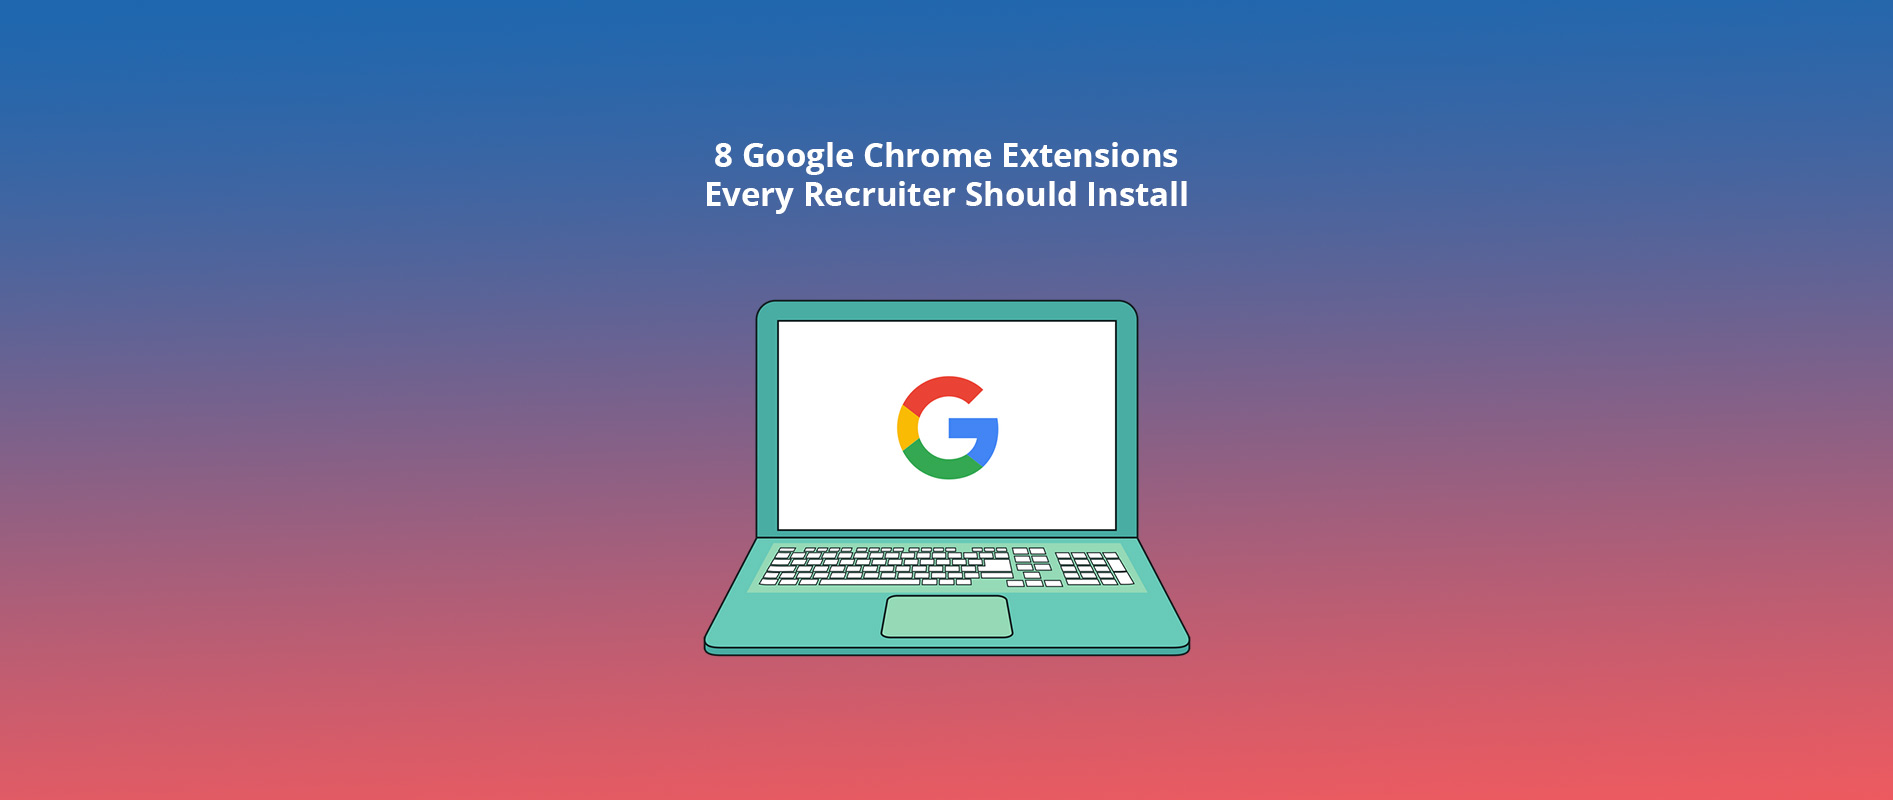 Eight of my favorite Google Chrome extensions